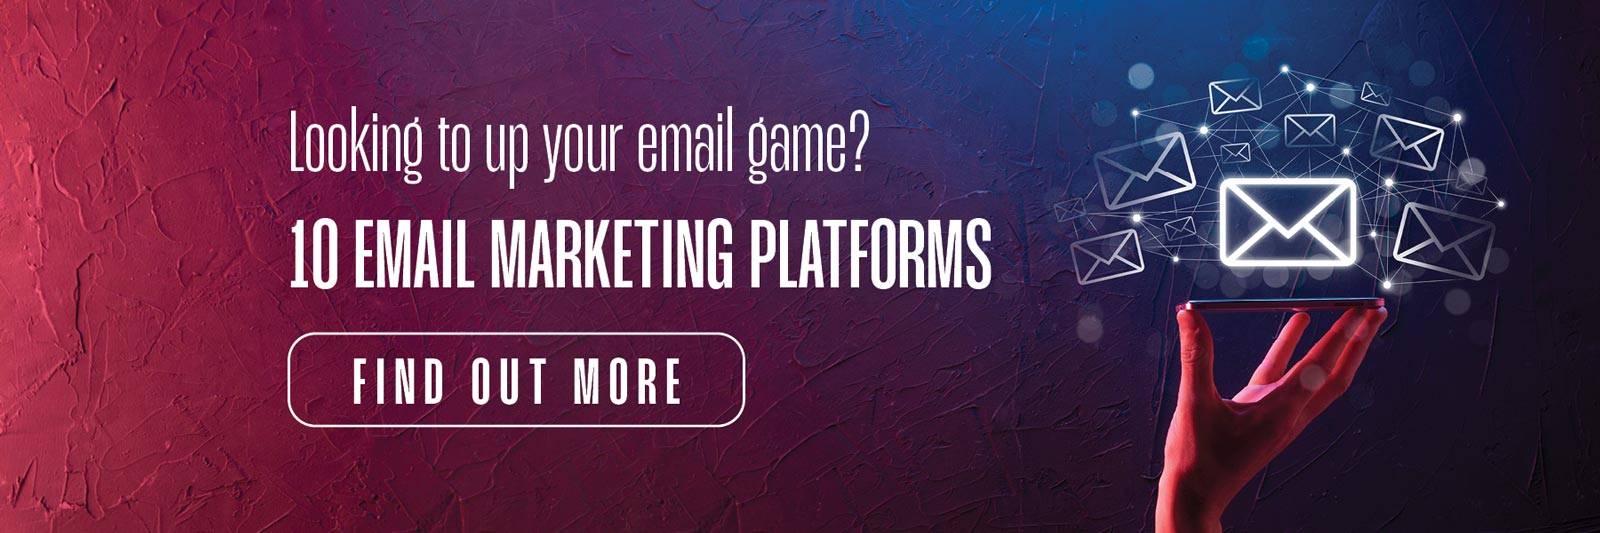 Top-10-Email-marketing-platforms-for-your-business-CTA